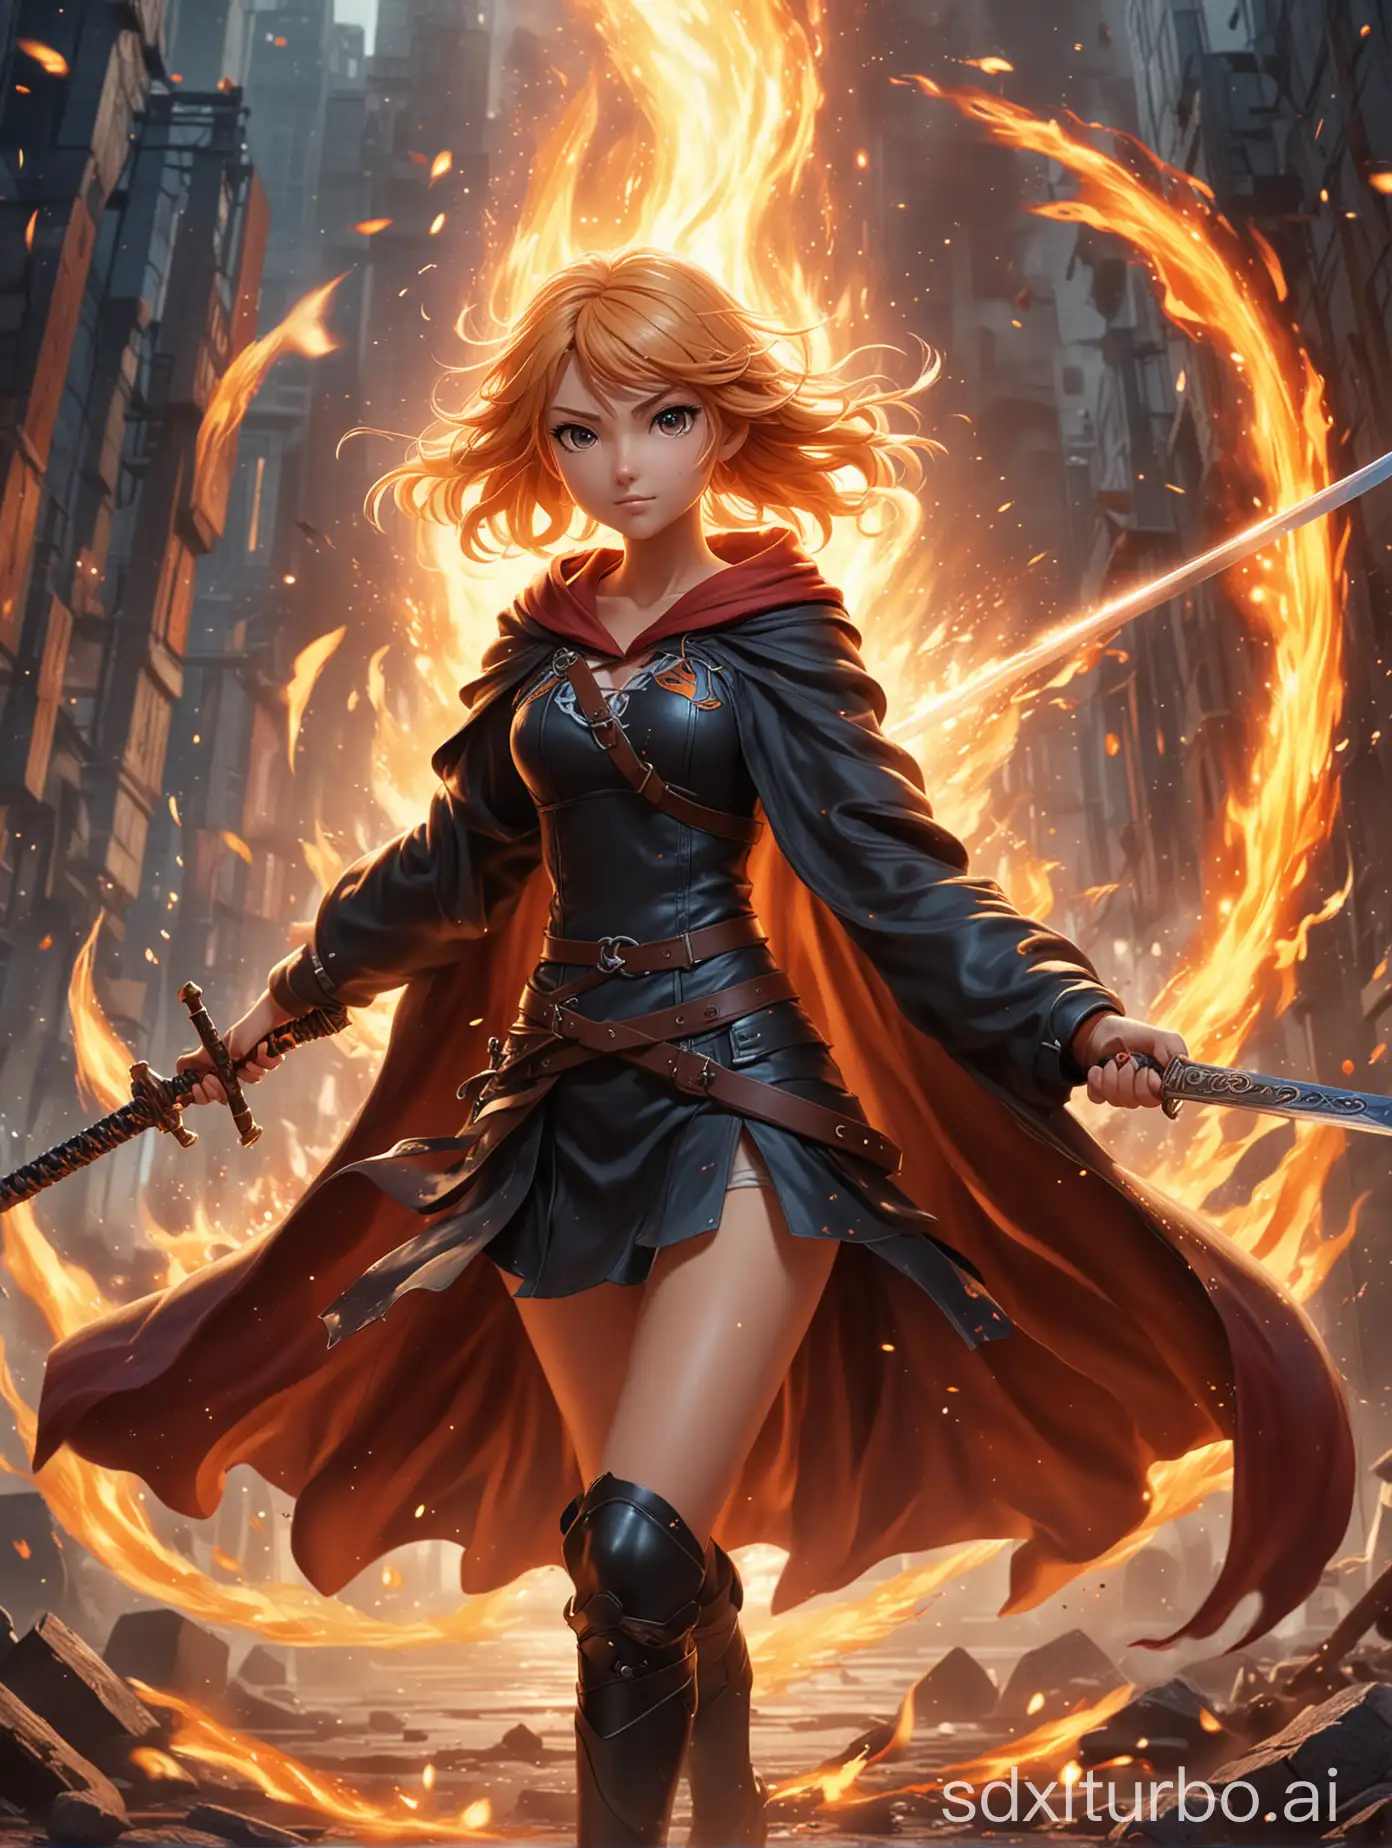 Create a battle action game-style poster featuring a dynamic full-body rendering of an anime cute girl wielding a sword. Her hair and cloak flow dramatically as she bounces through the air with flames blazing in the background.